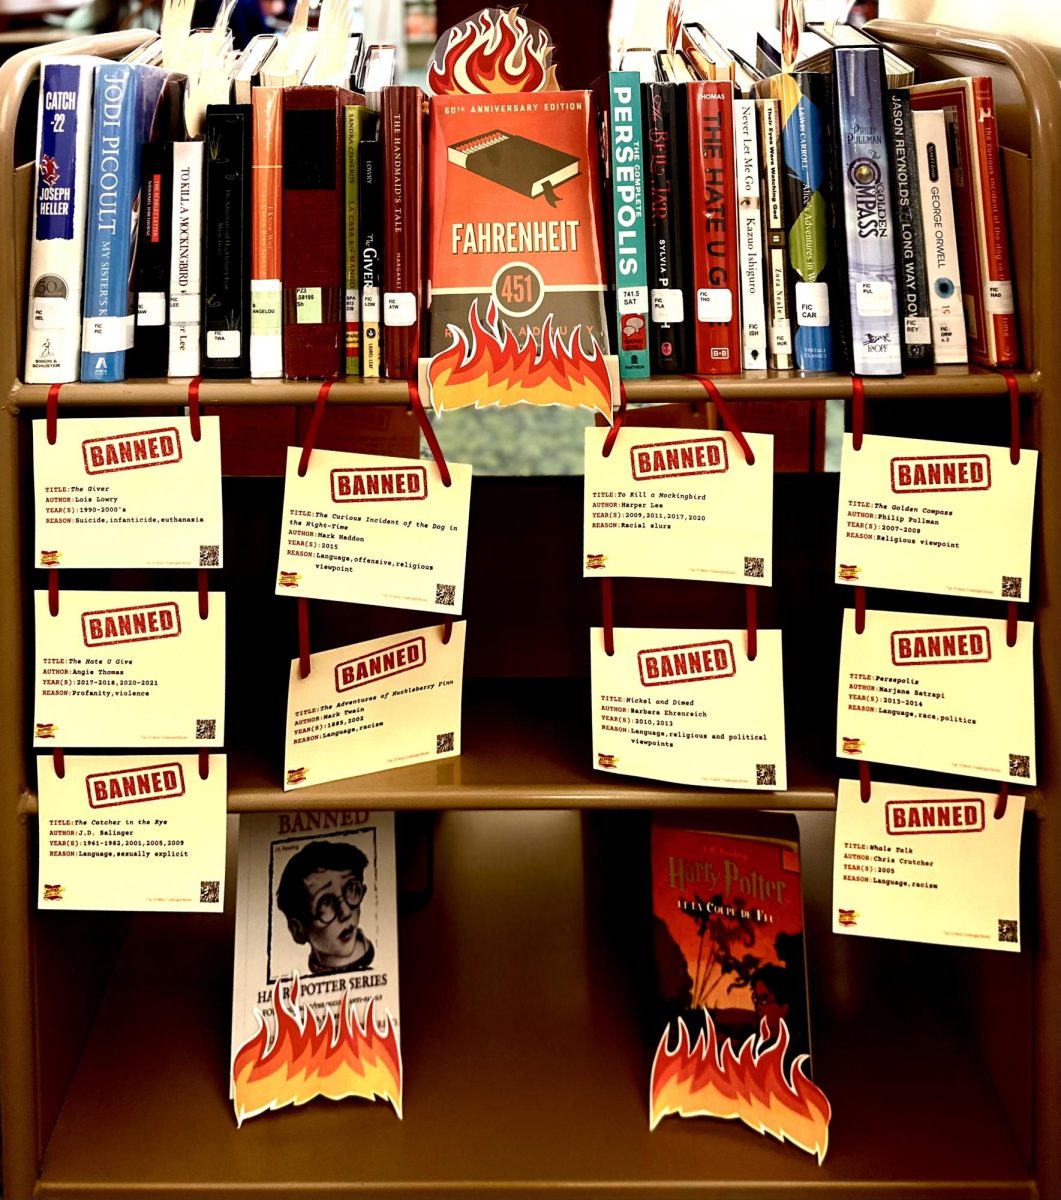 Carrolltons+Upper+School+Library+displays+books+that+have+been+banned+during+banned+books+week.